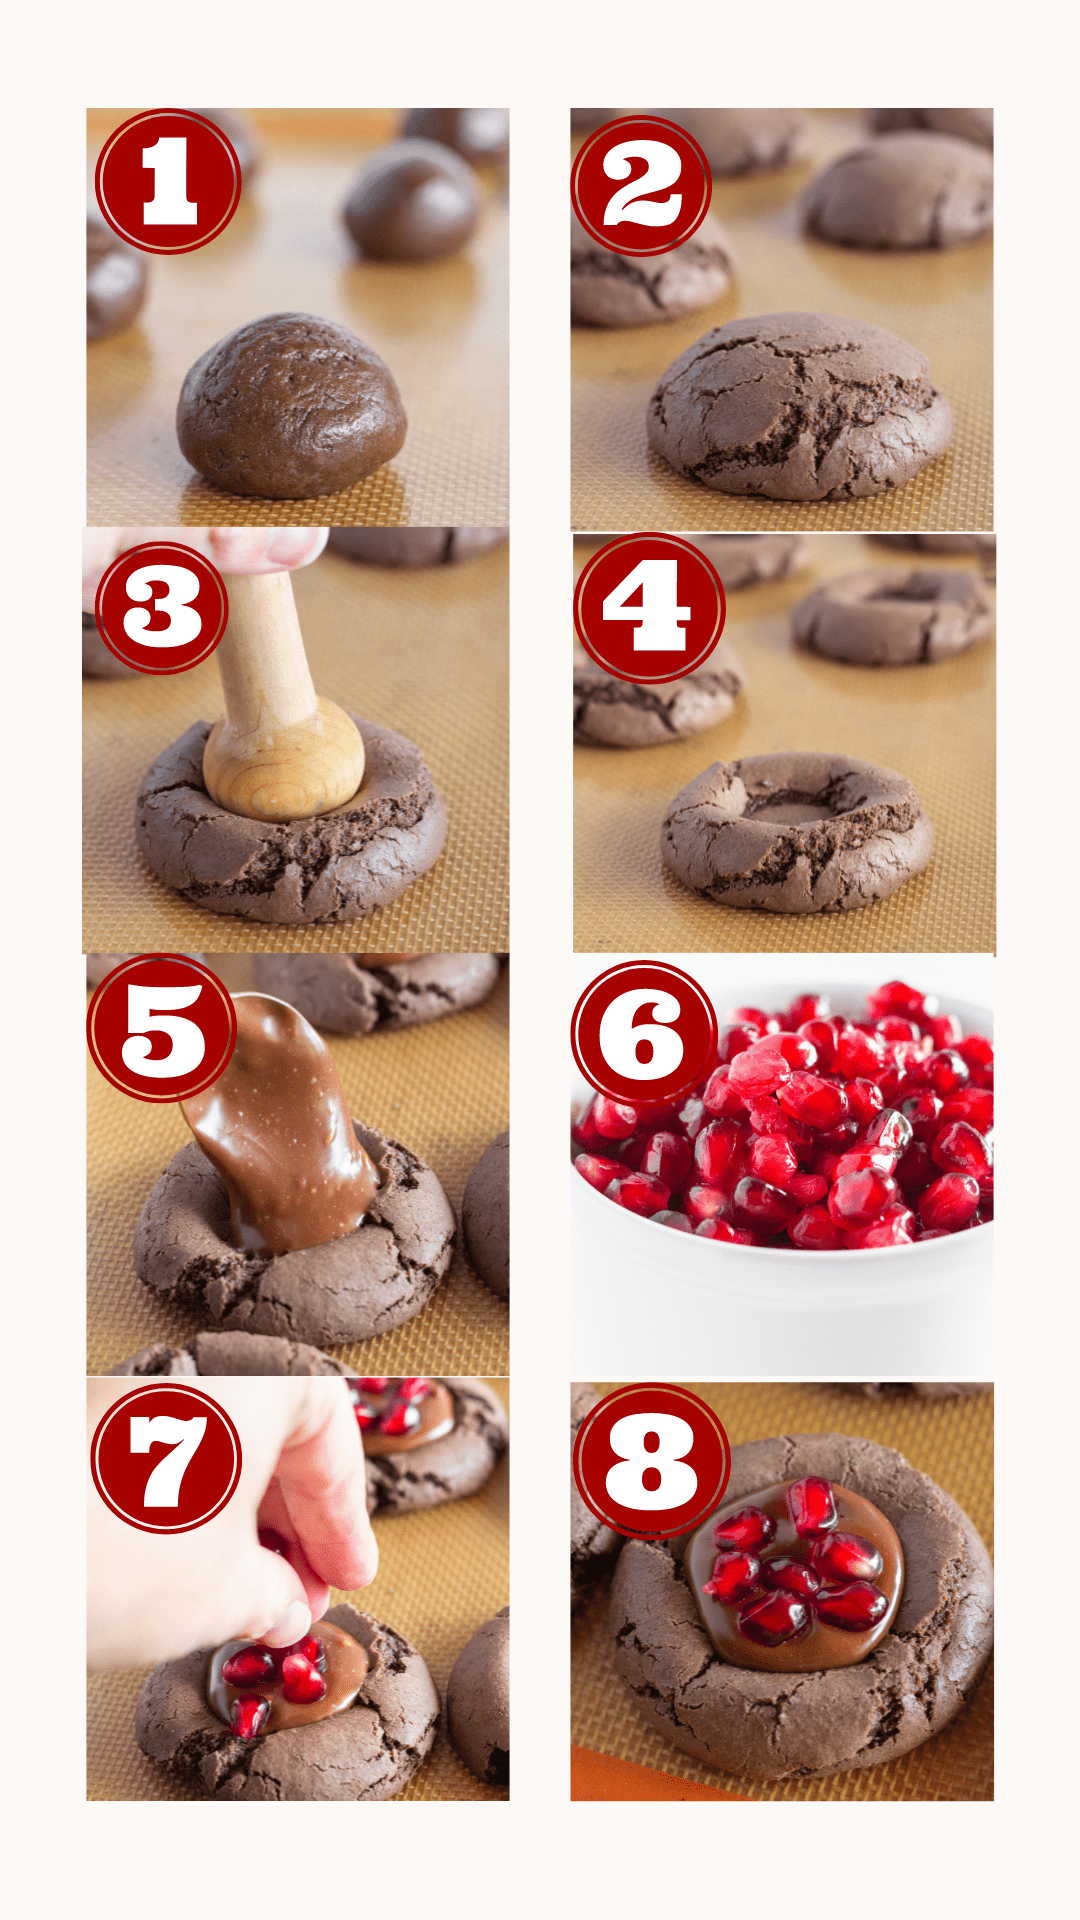 8 step by step photos for making Pomegranate Truffle Cookies.